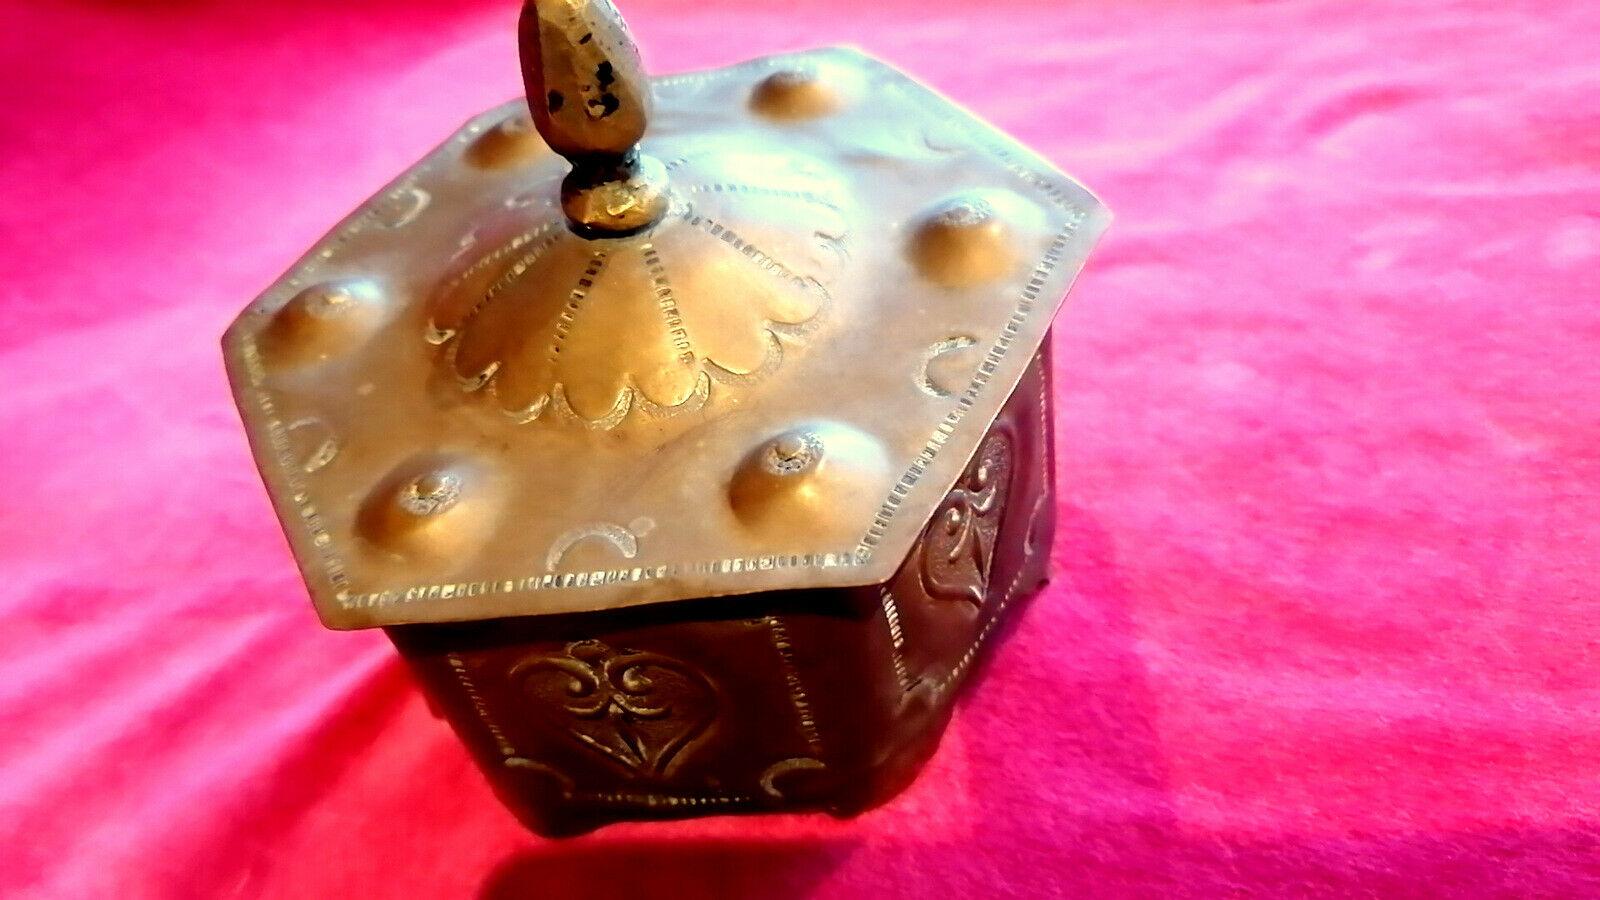 Antique handmade brass tobacco / tea tin box with lid 18th century. The item is in good condition, it can be used at home, hotel, pubs, B&B, cottage, farm, office, sheds or shops display, etc. It could be an unforgettable present.

Material: